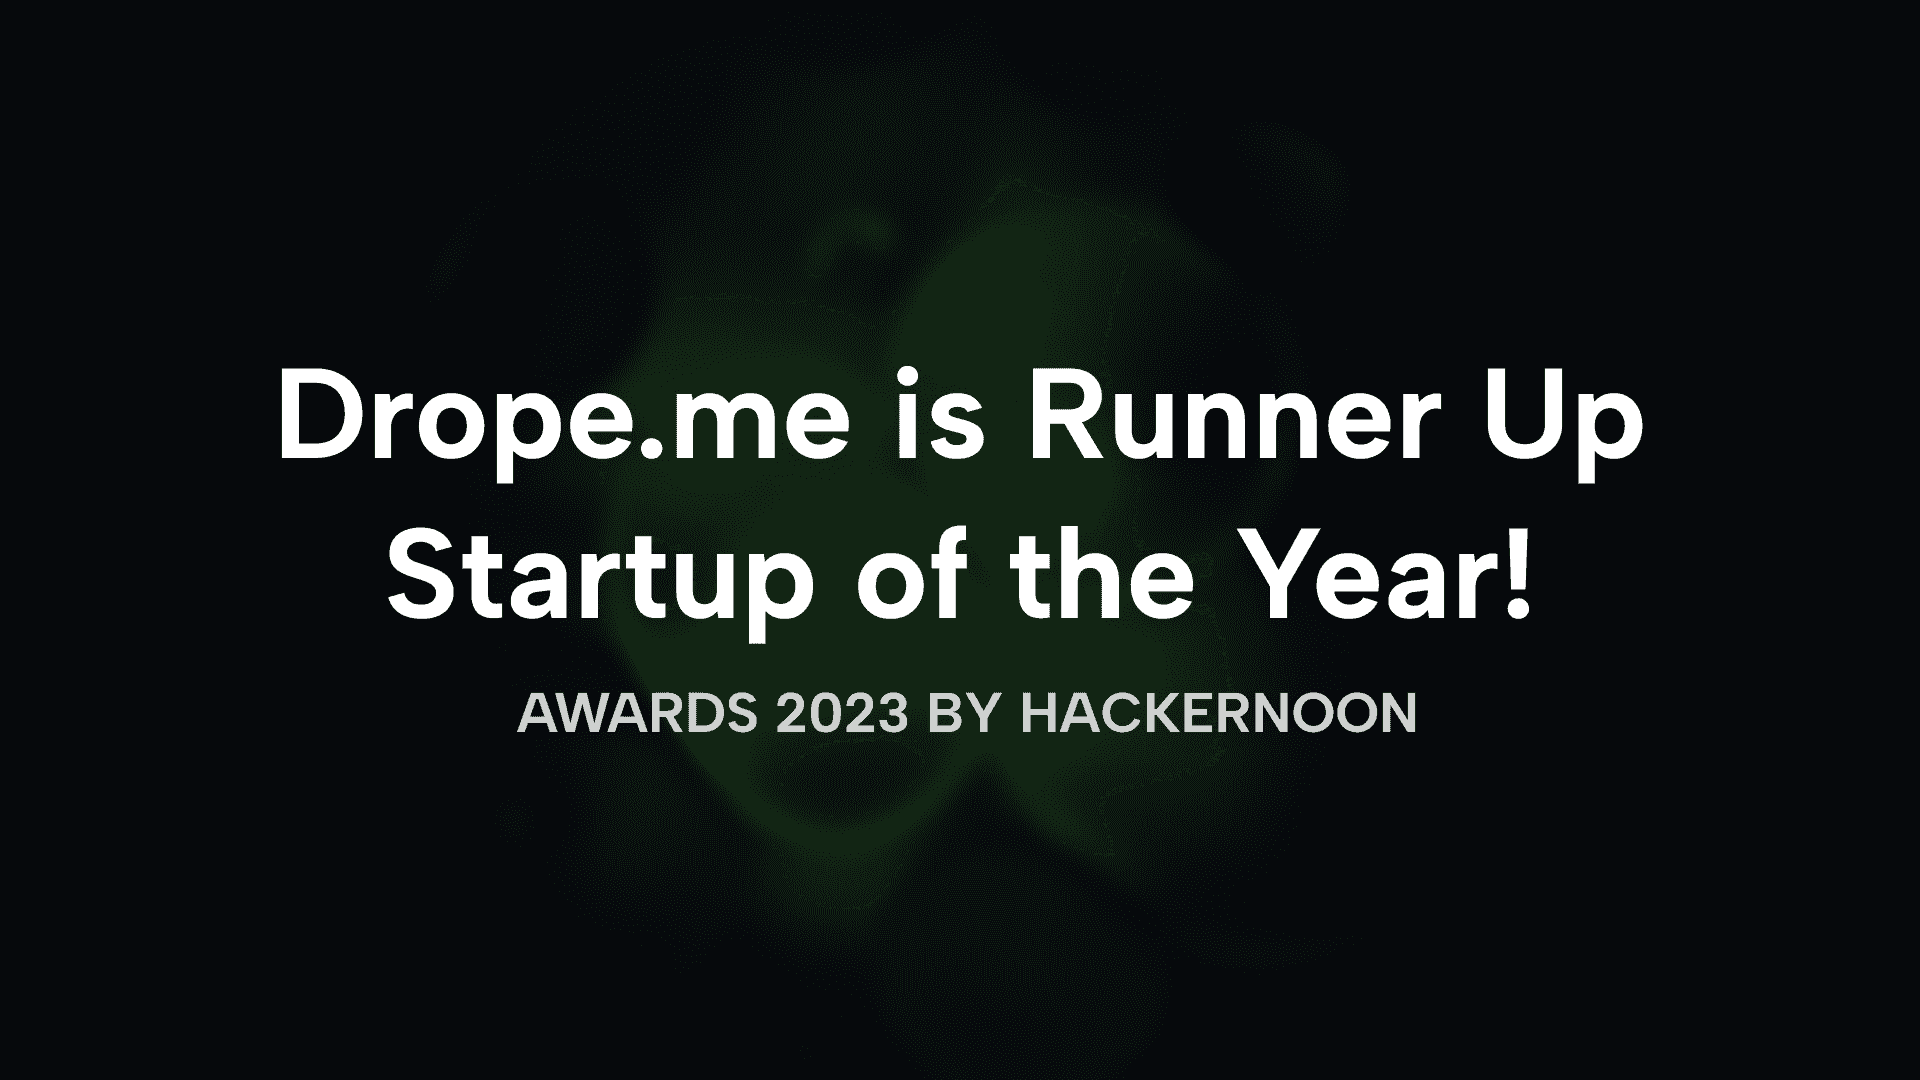 Drope.me is the Runner Up Startup of the Year 2023!